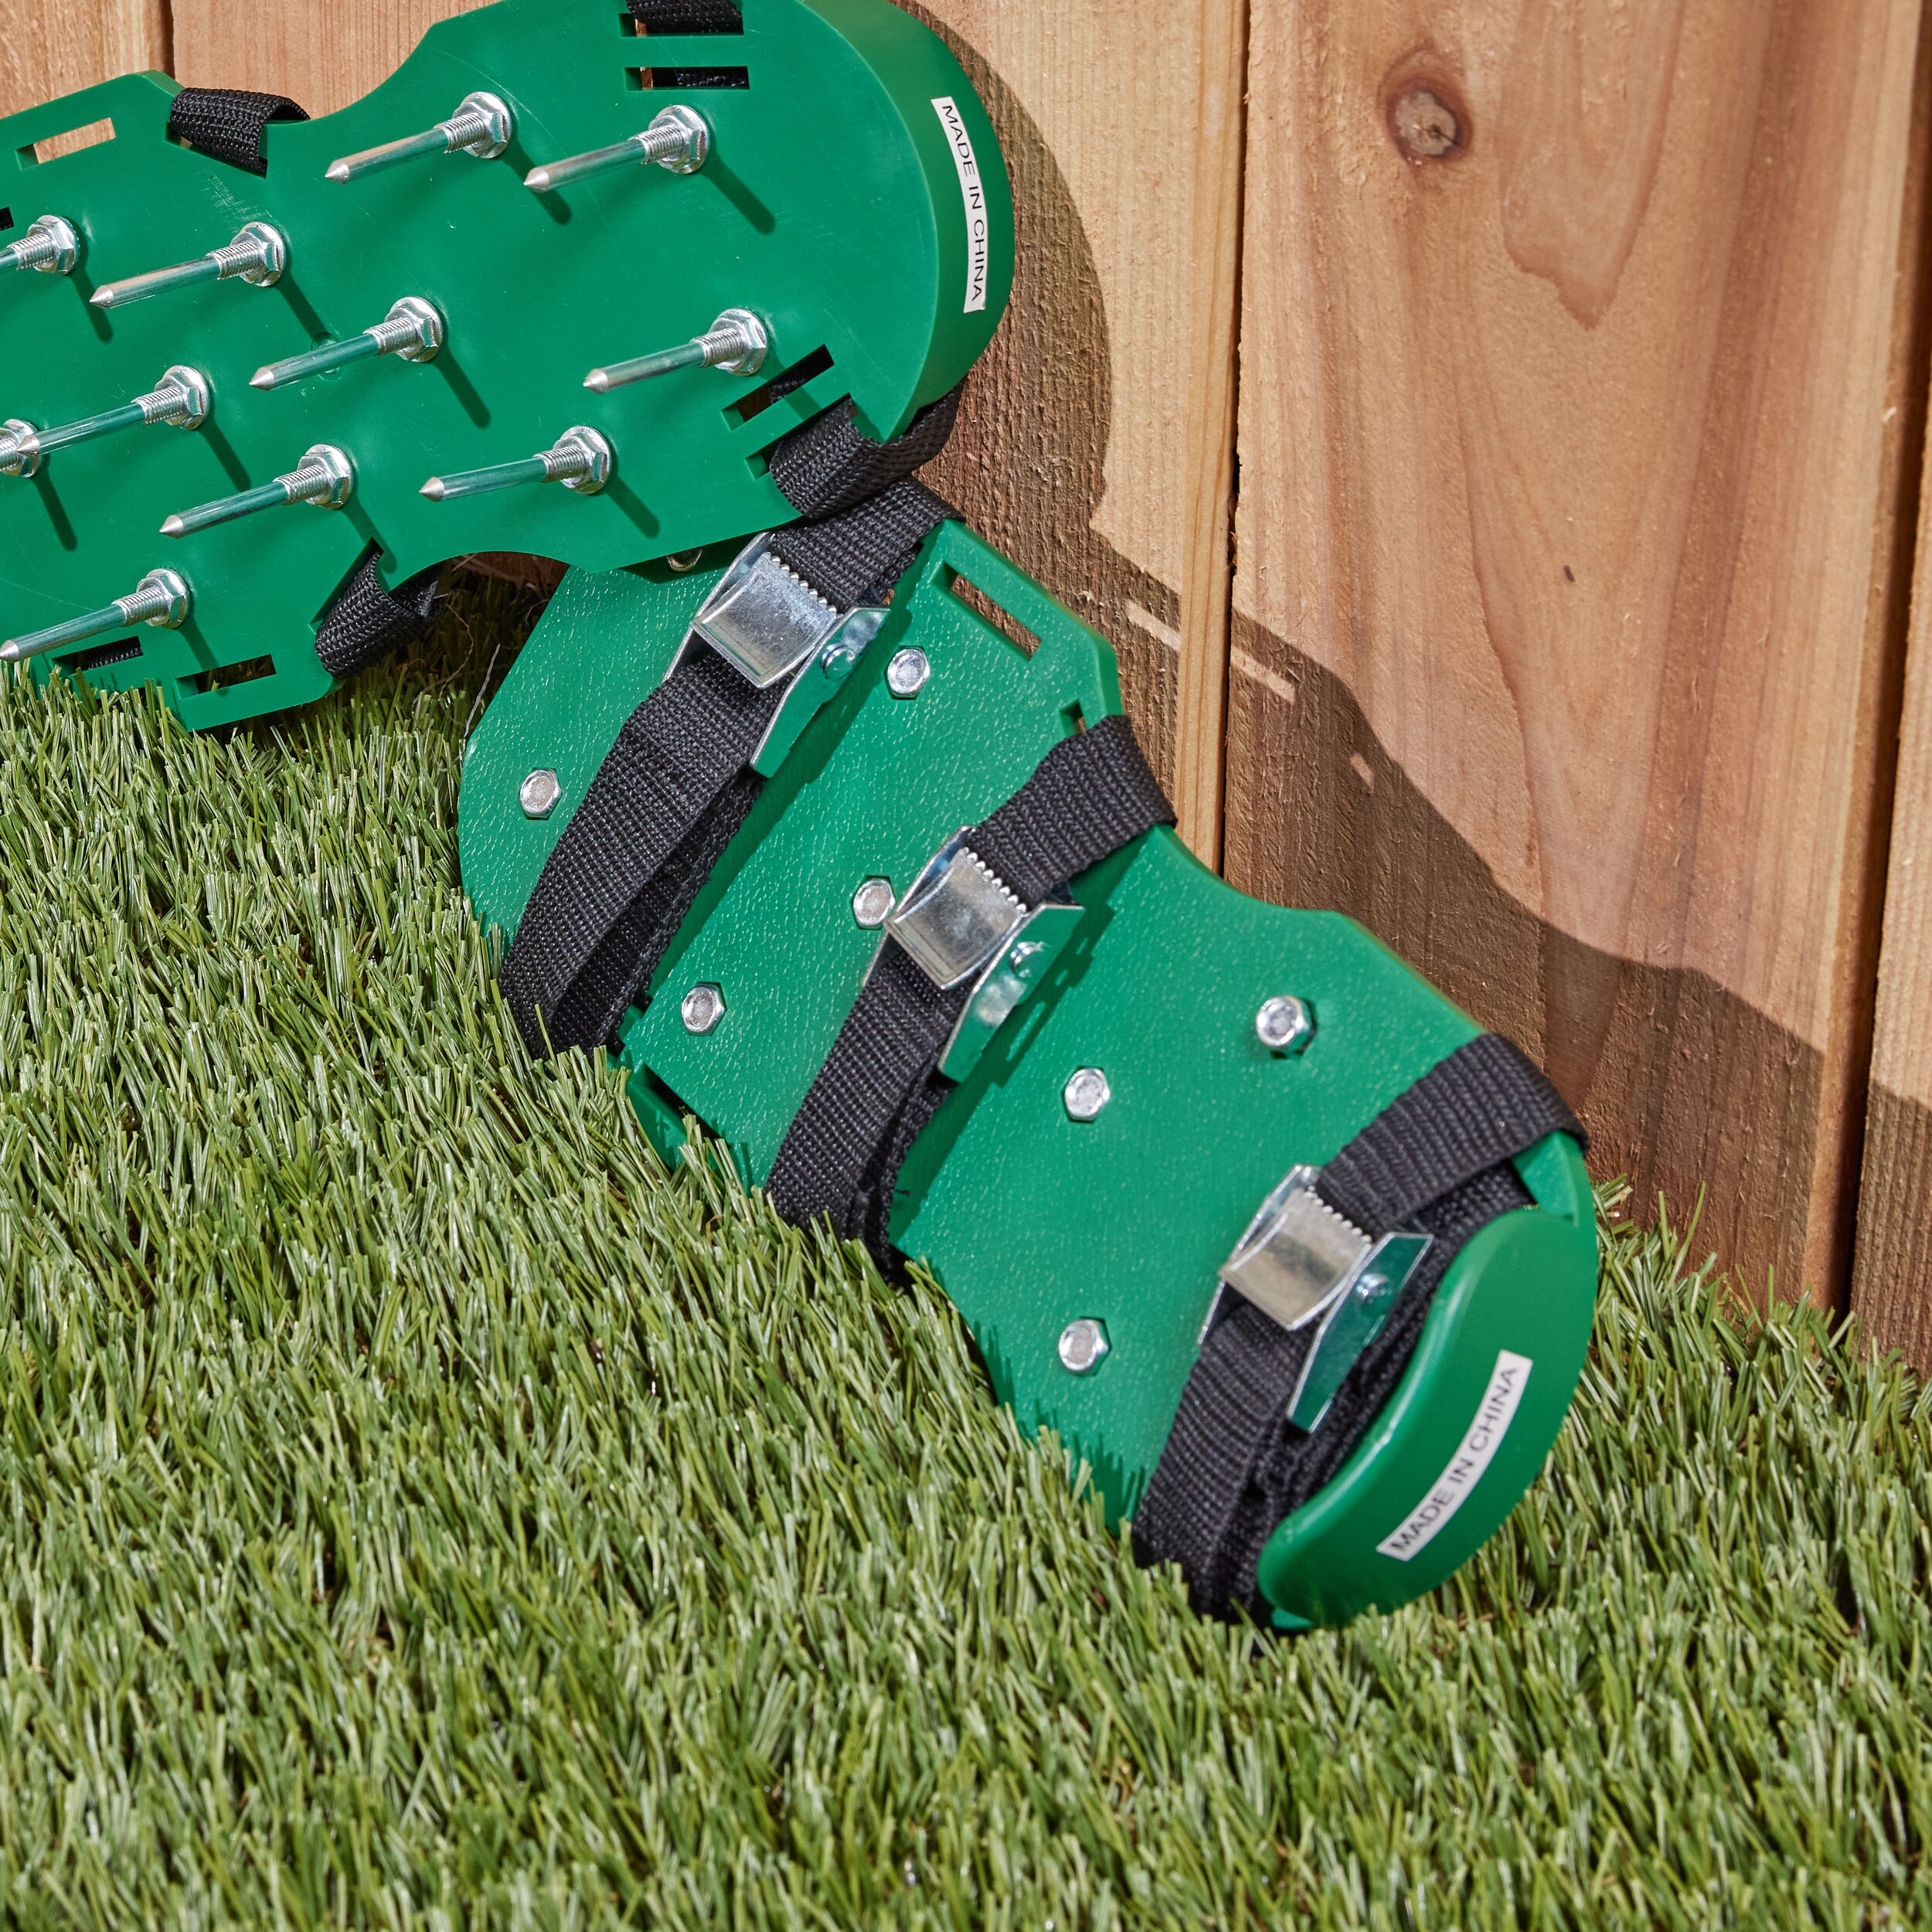 Lawn Aerator Shoes Sandals Plastic Grass Aerating Spikes Sod Garden Tool A5N6 